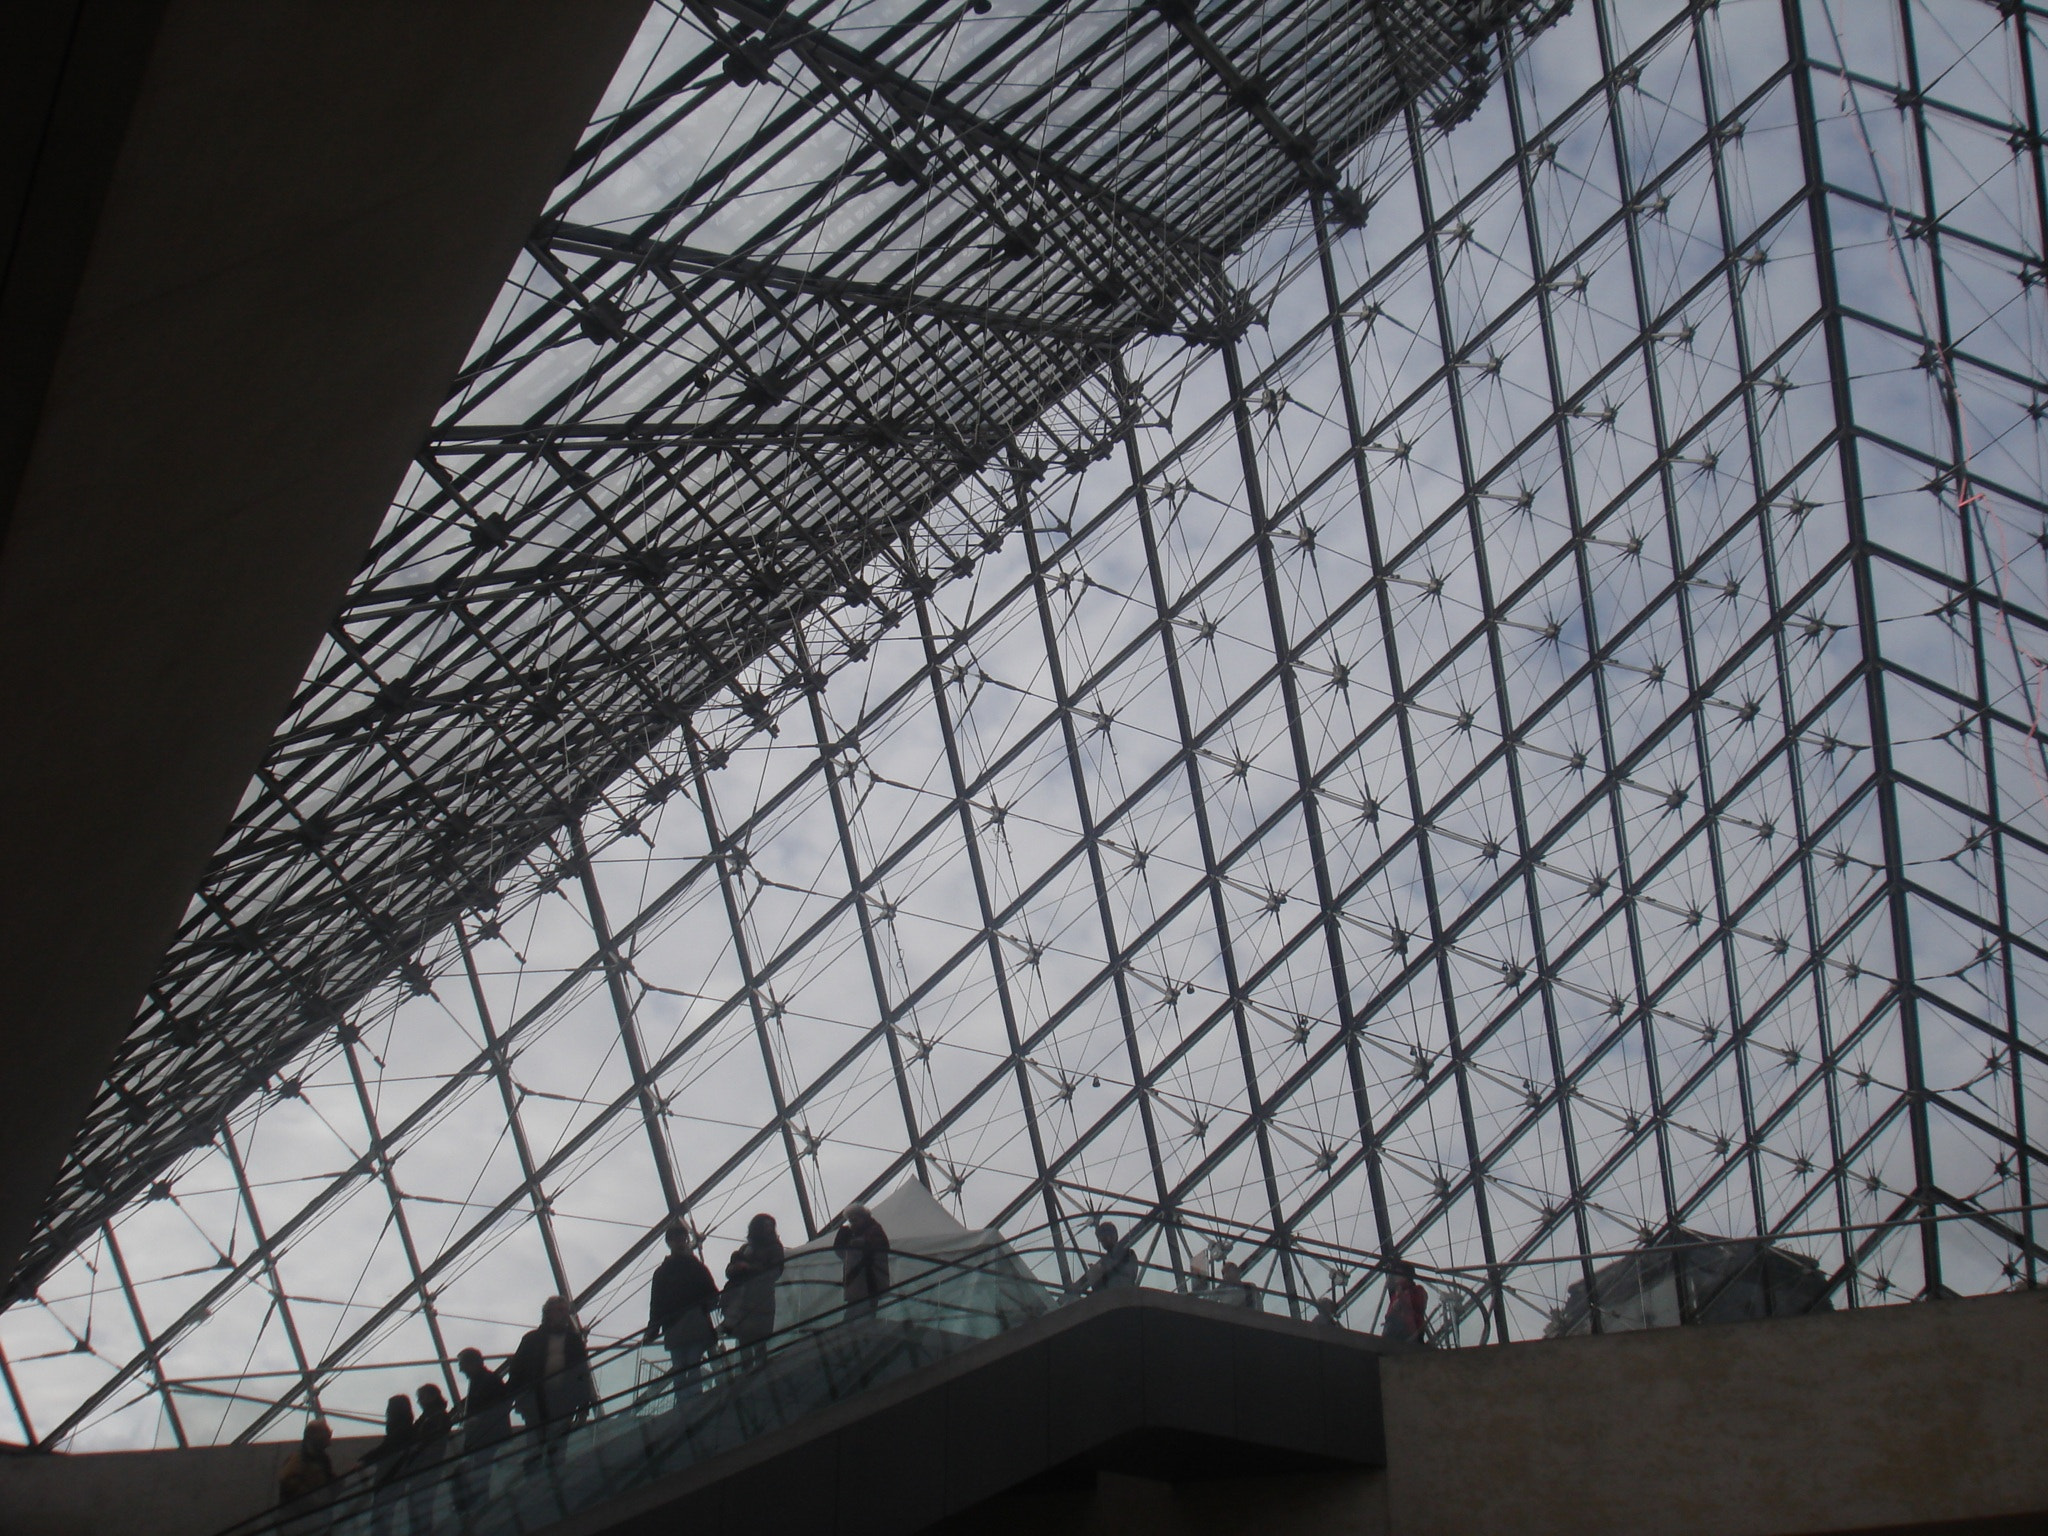 Sony DSC-W100 sample photo. Not the typical view of the louvre's pyramid photography